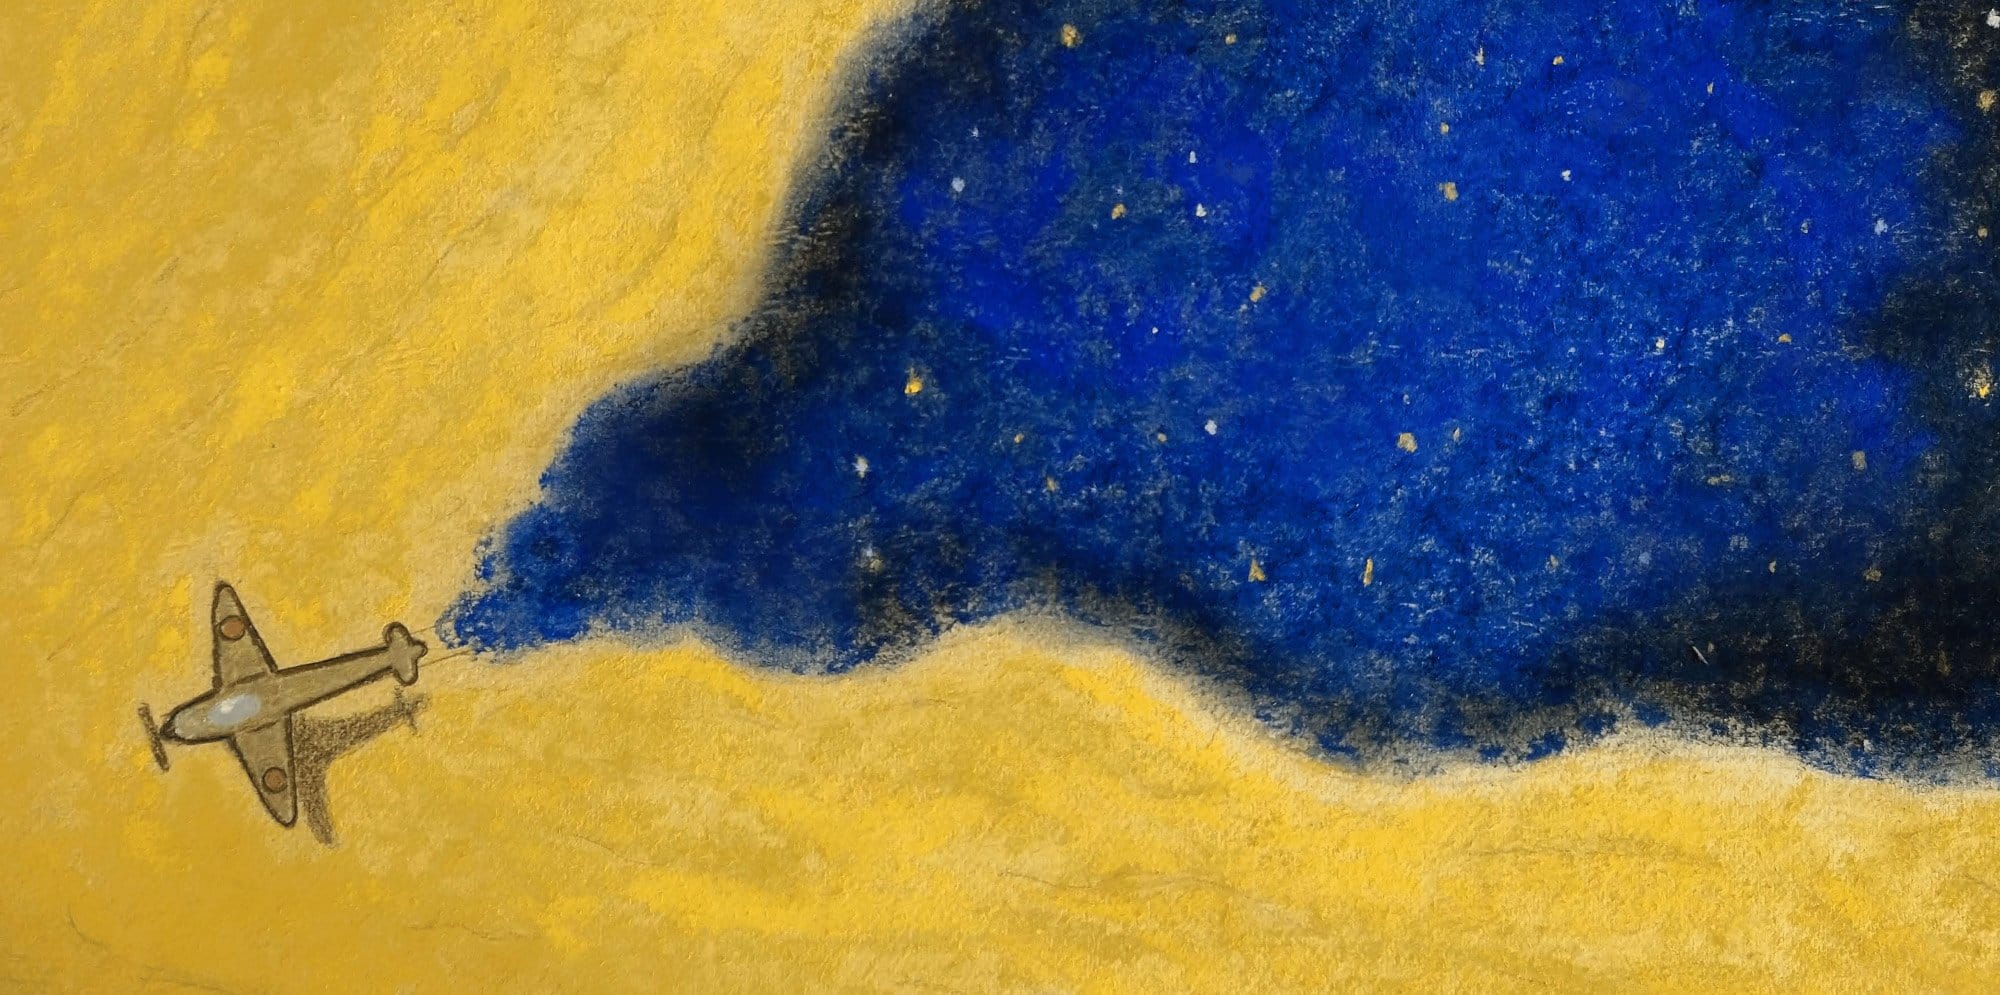 A wax crayon drawing depicts a plane flying across a mustard yellow background, the plane leaves a trail of midnight blue starry smog in its wake.